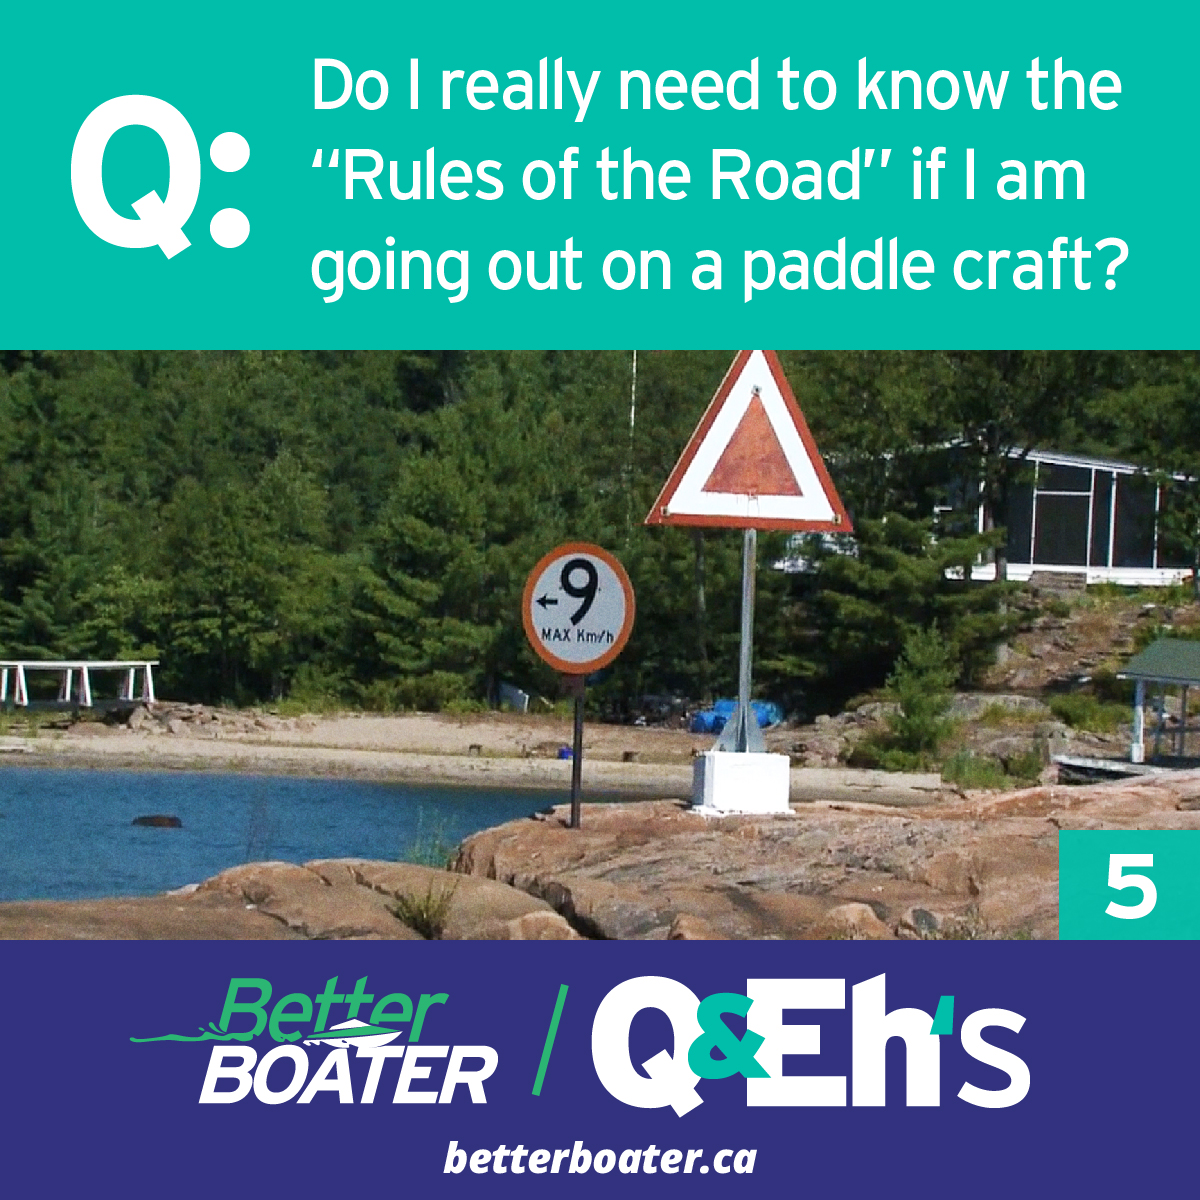 https://betterboater.ca/Q&Eh:%20Paddling%20Rules